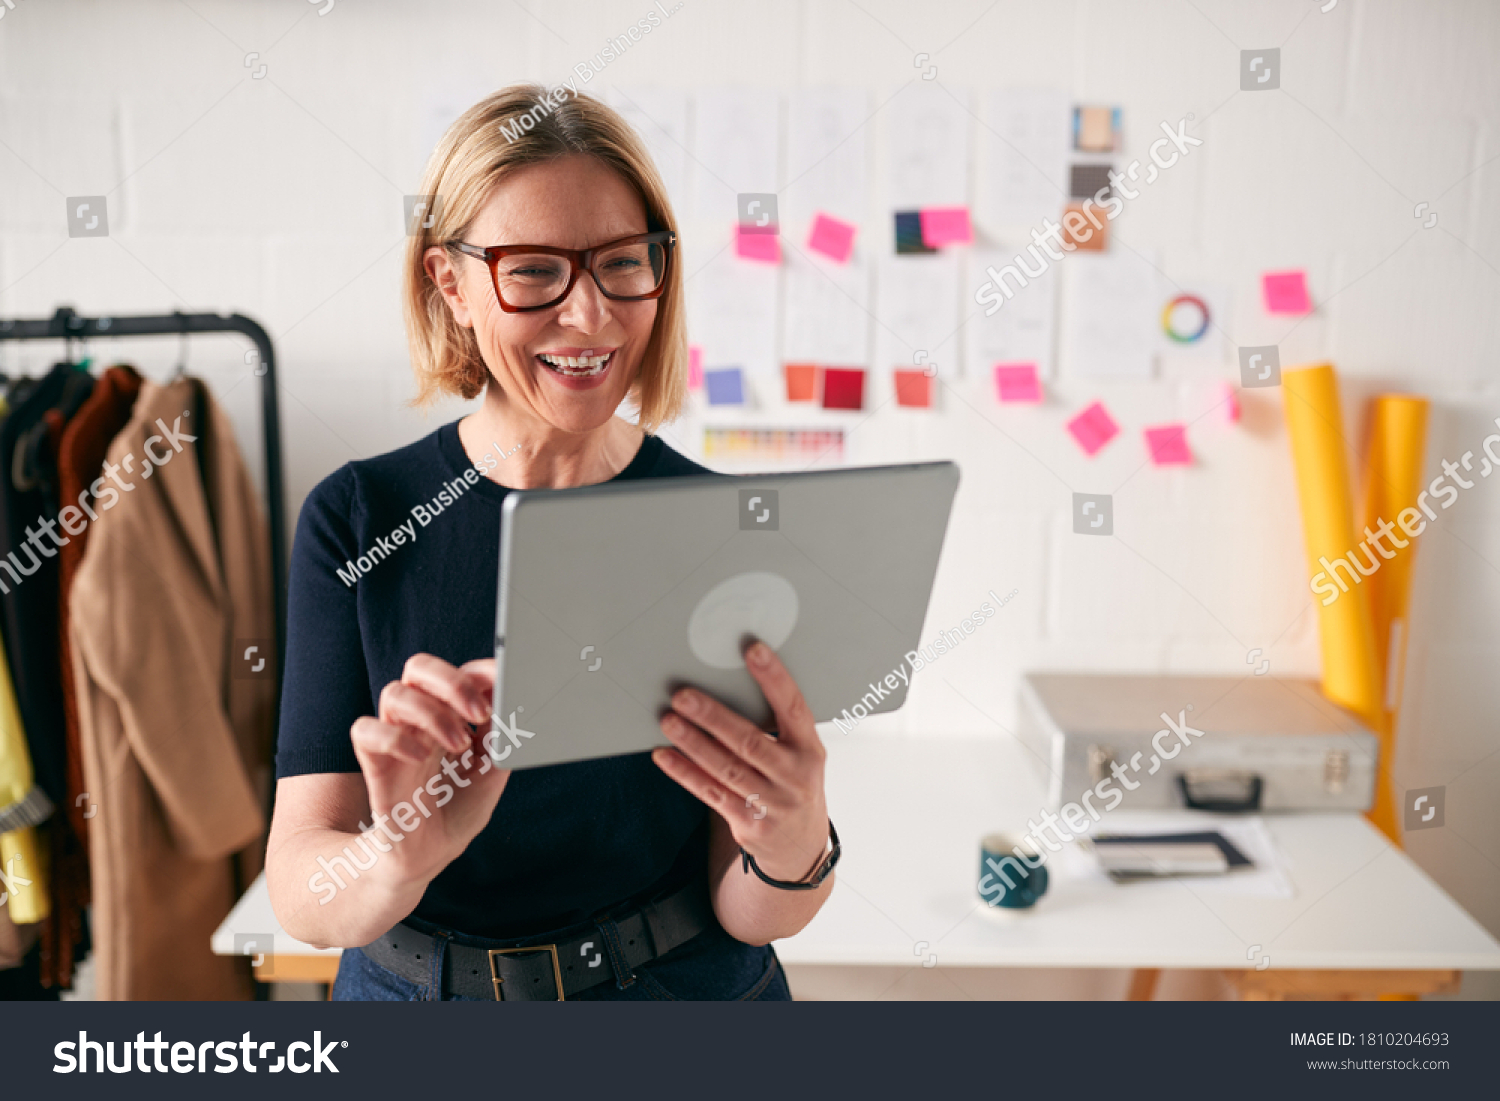 Mature Businesswoman Using Tablet Computer In Studio Of Start Up Fashion Business #1810204693